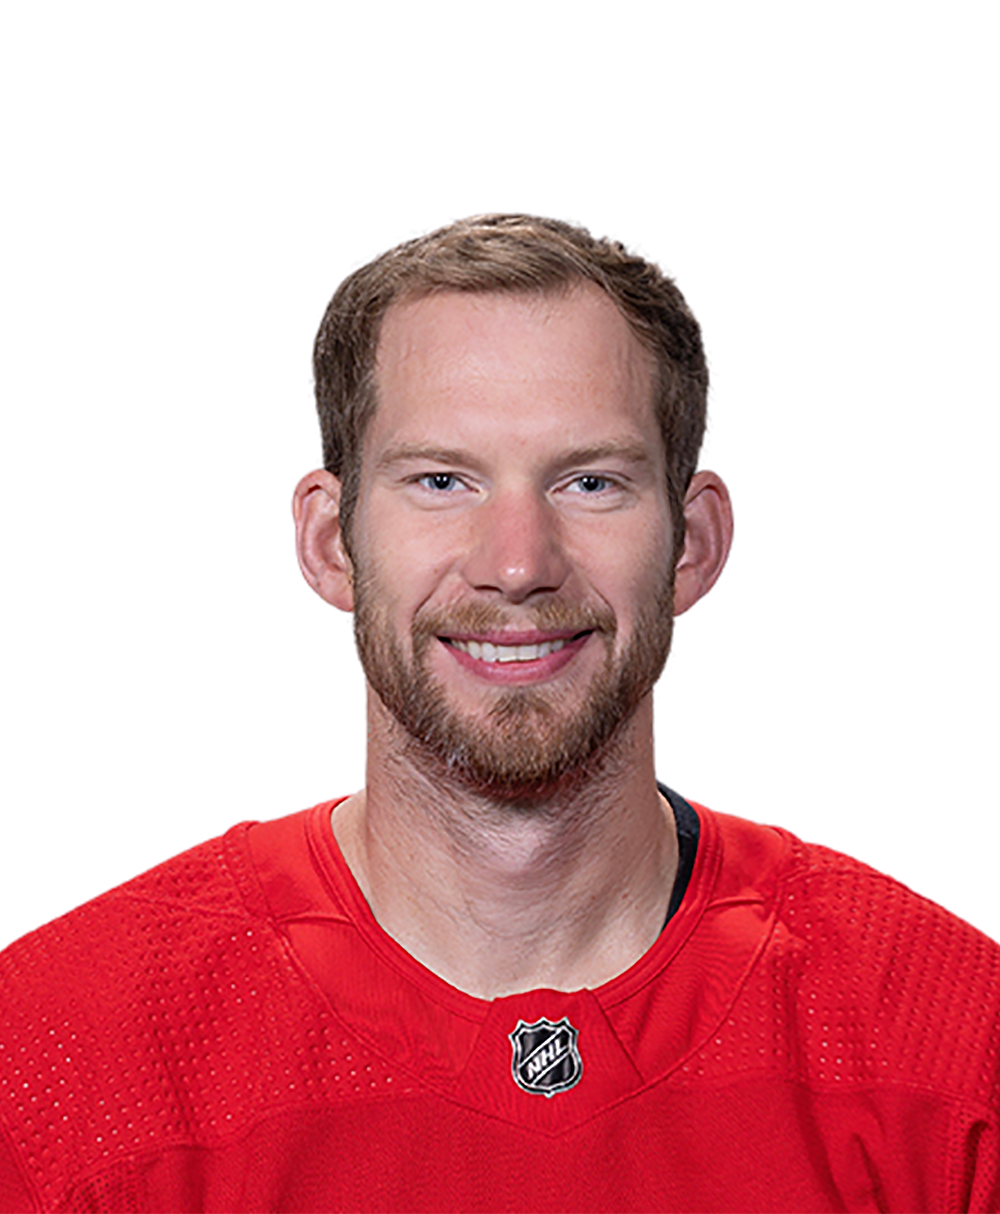 James Reimer stops 23 shots to help lift the Red Wings past the